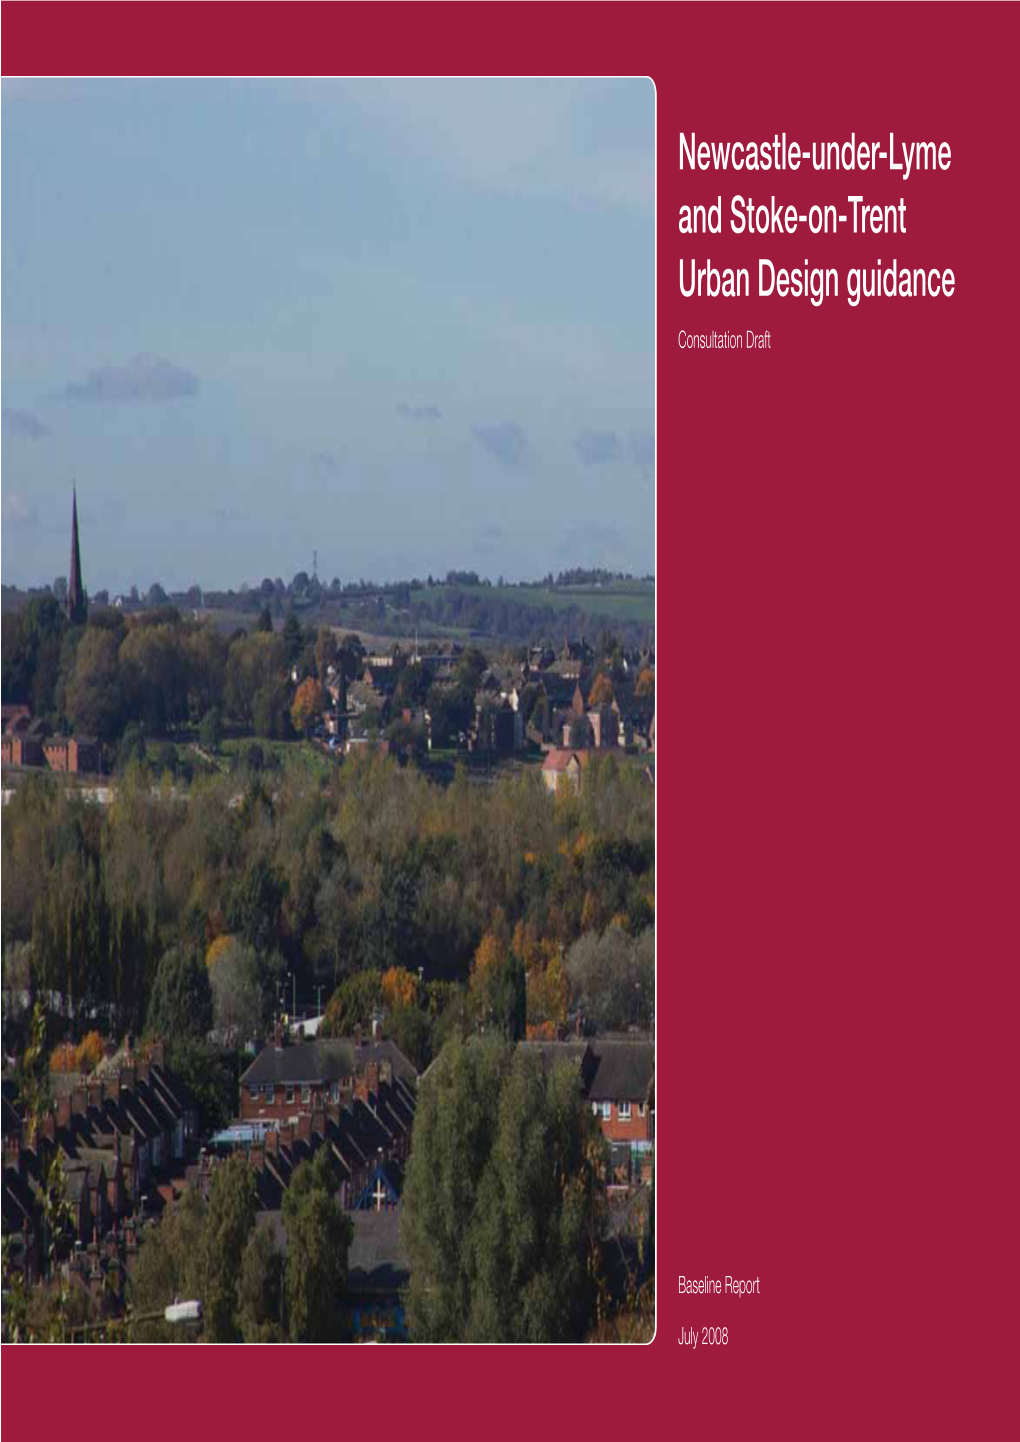 Newcastle-Under-Lyme and Stoke-On-Trent Urban Design Guidance Consultation Draft